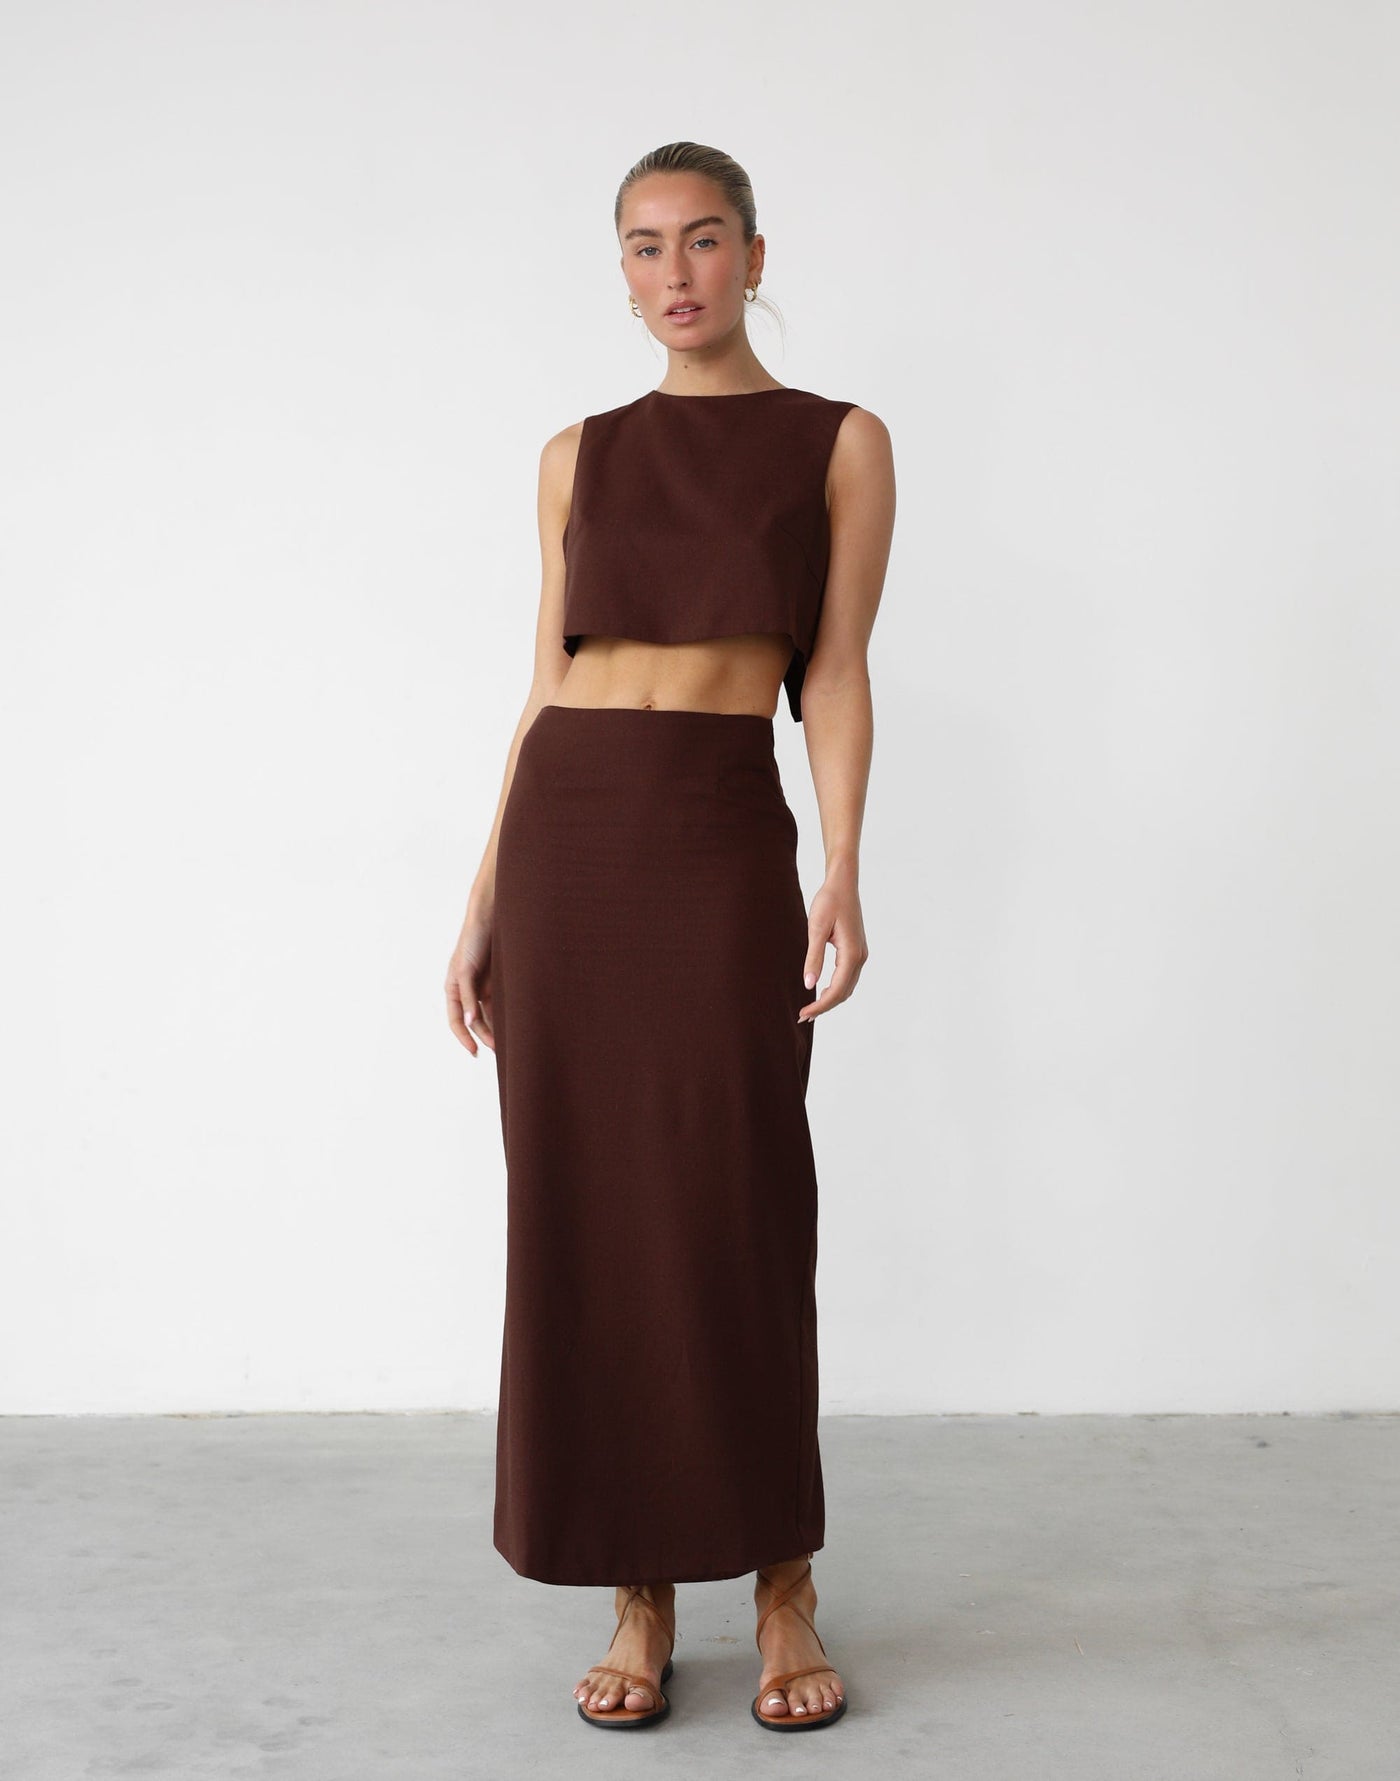 Cleo Linen Maxi Skirt (Cocoa) - High Rise Fitted Flared Maxi Skirt - Women's Skirt - Charcoal Clothing